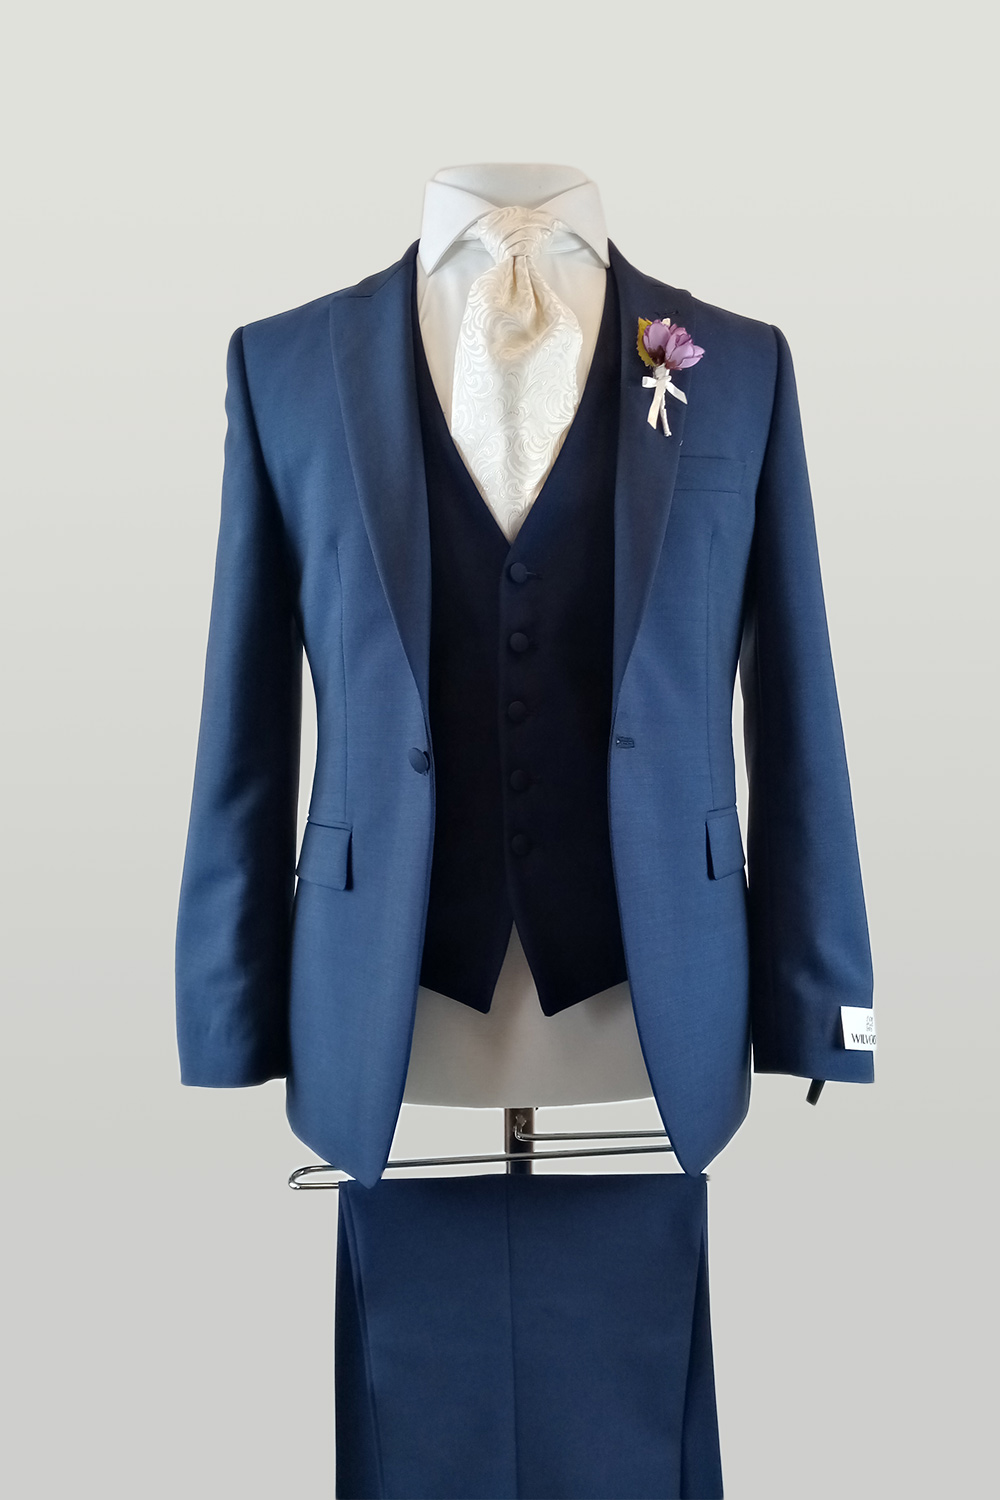 Royal 1 Button 3 Piece Suit - Tom Murphy's Formal and Menswear